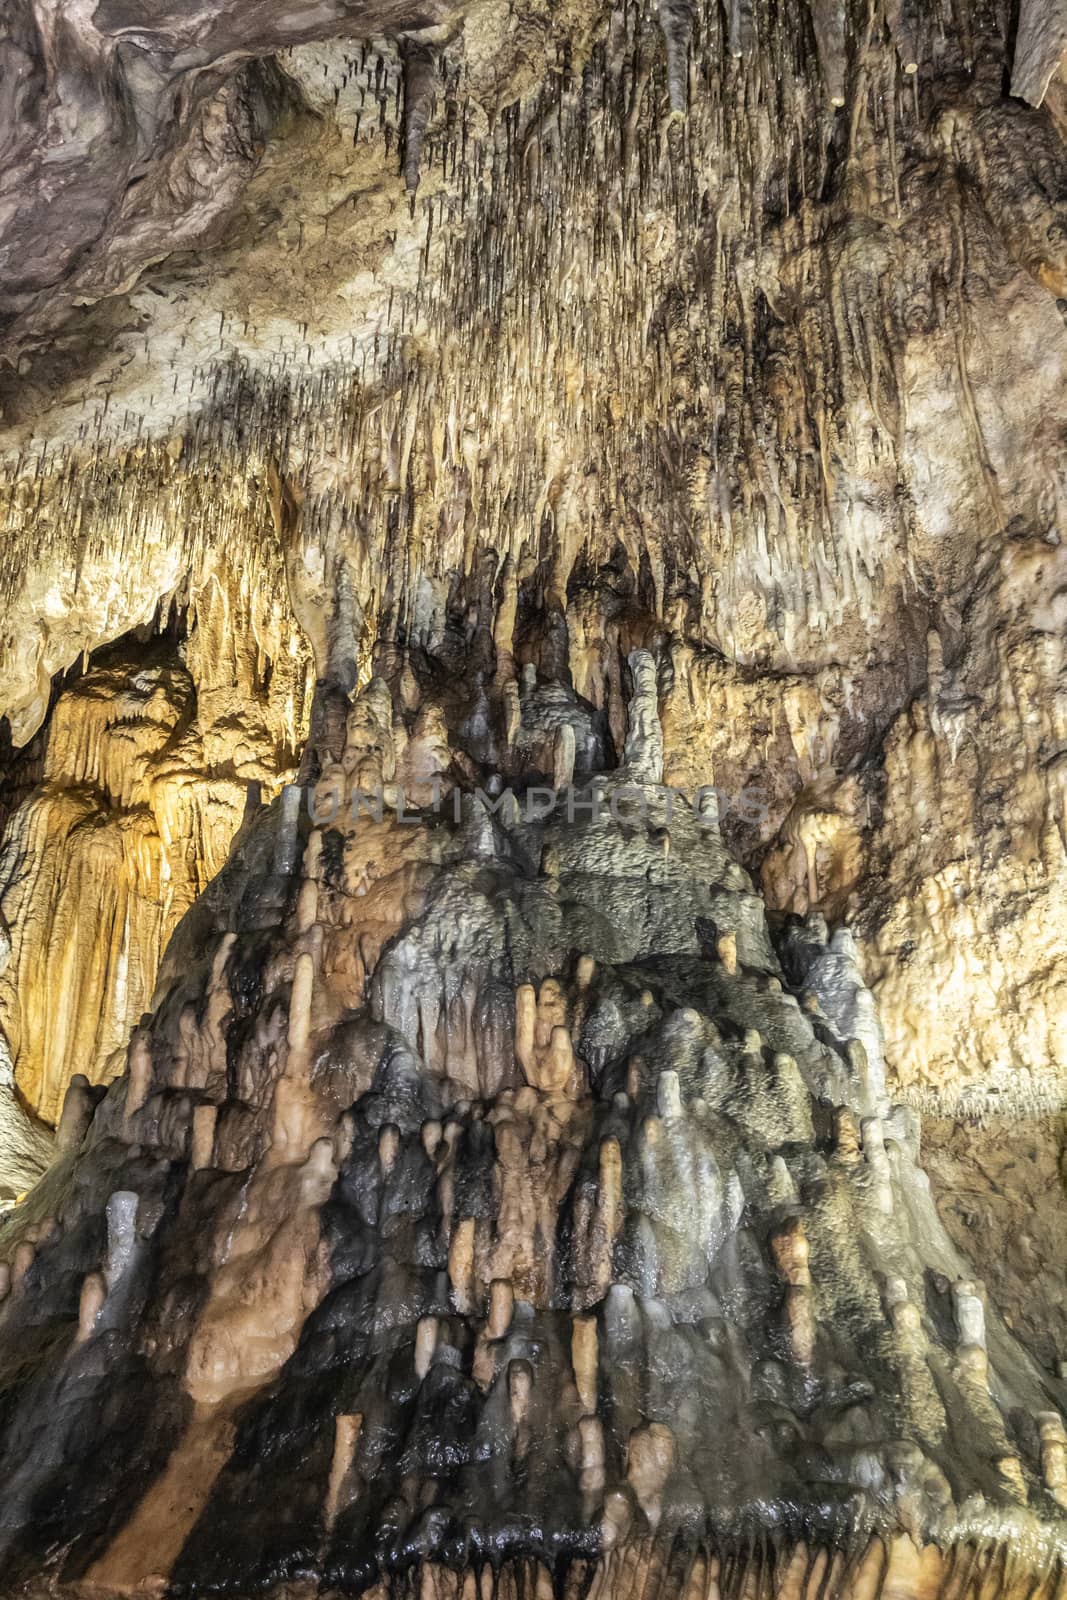 Han-sur-Lesse, Belgium - June 25, 2019: Grottes-de-Han 18 of 36. subterranean pictures of Stalagmites and stalactites in different shapes and colors throughout tunnels, caverns and large halls..